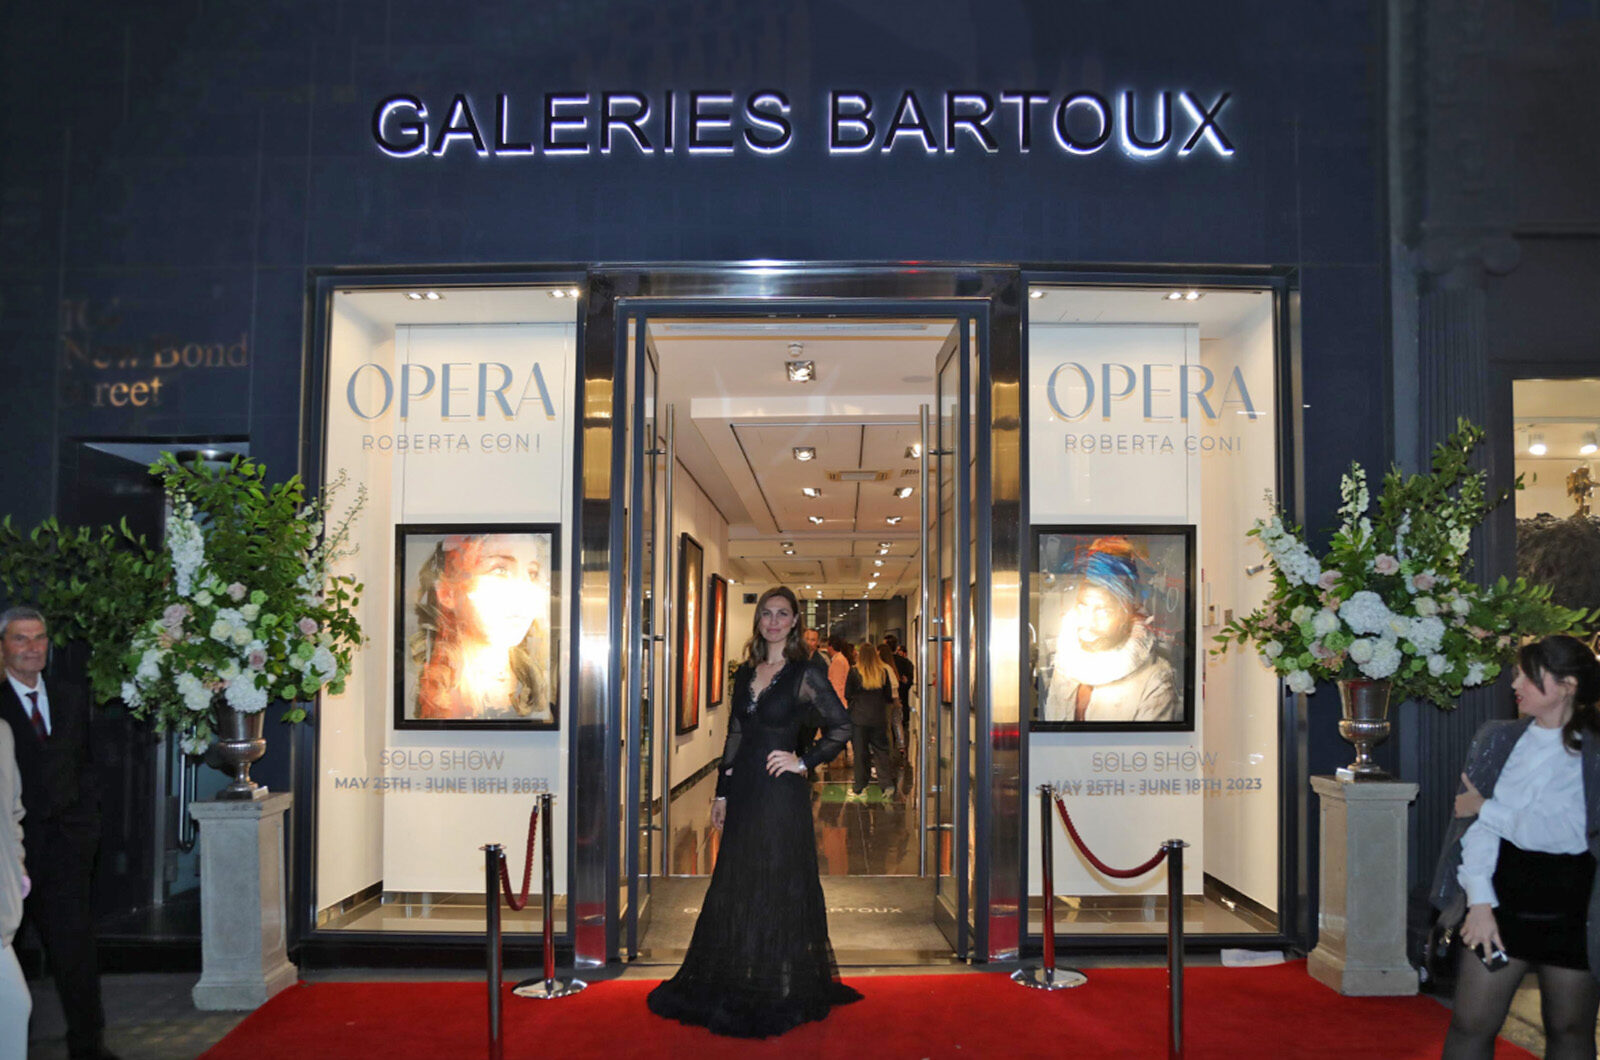 BACK IN IMAGES – « OPERA »  ROBERTA CONI SOLO SHOW LONDON - Galeries Bartoux